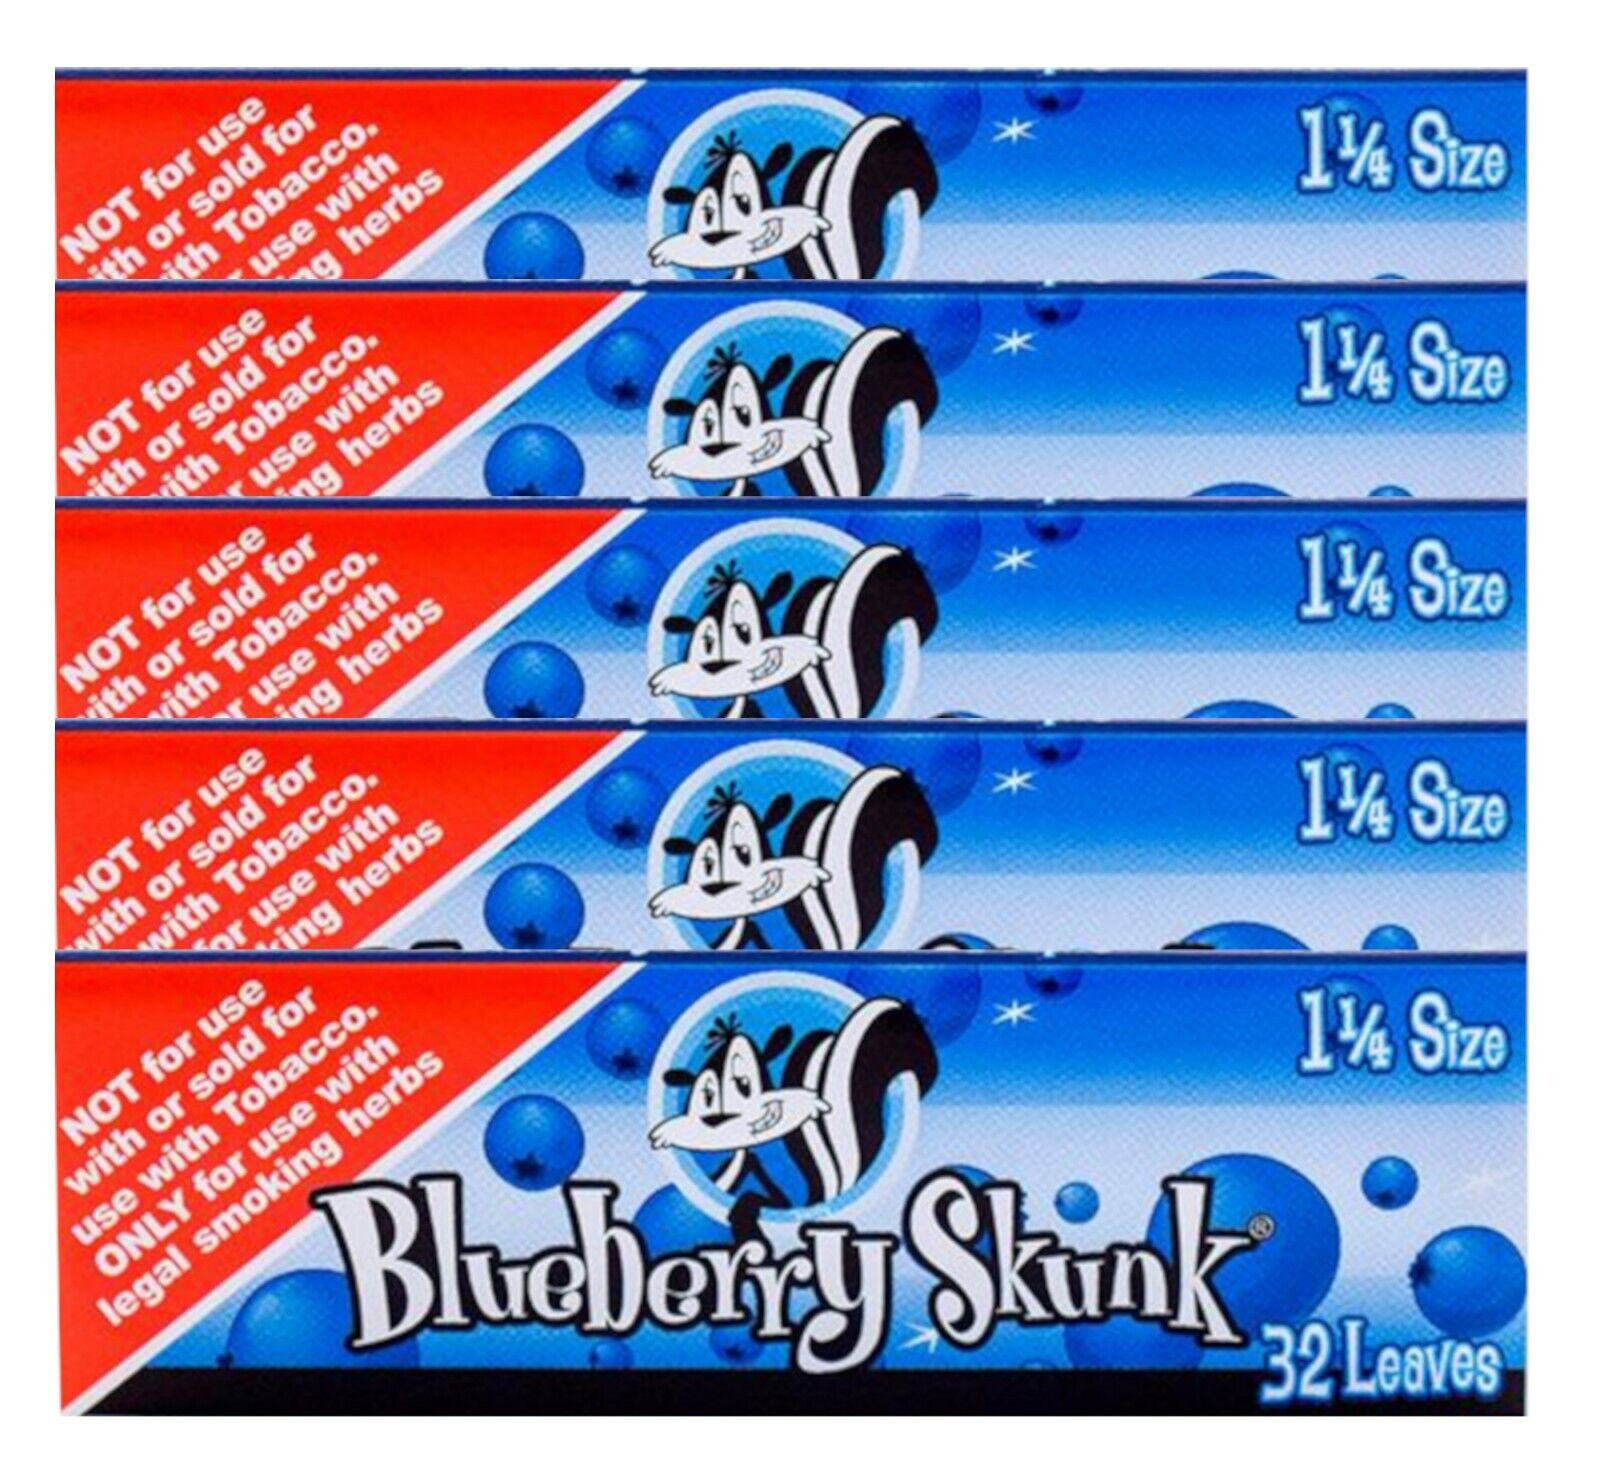 Skunk Blueberry Flavored Rolling Papers 1.25 5 Packs